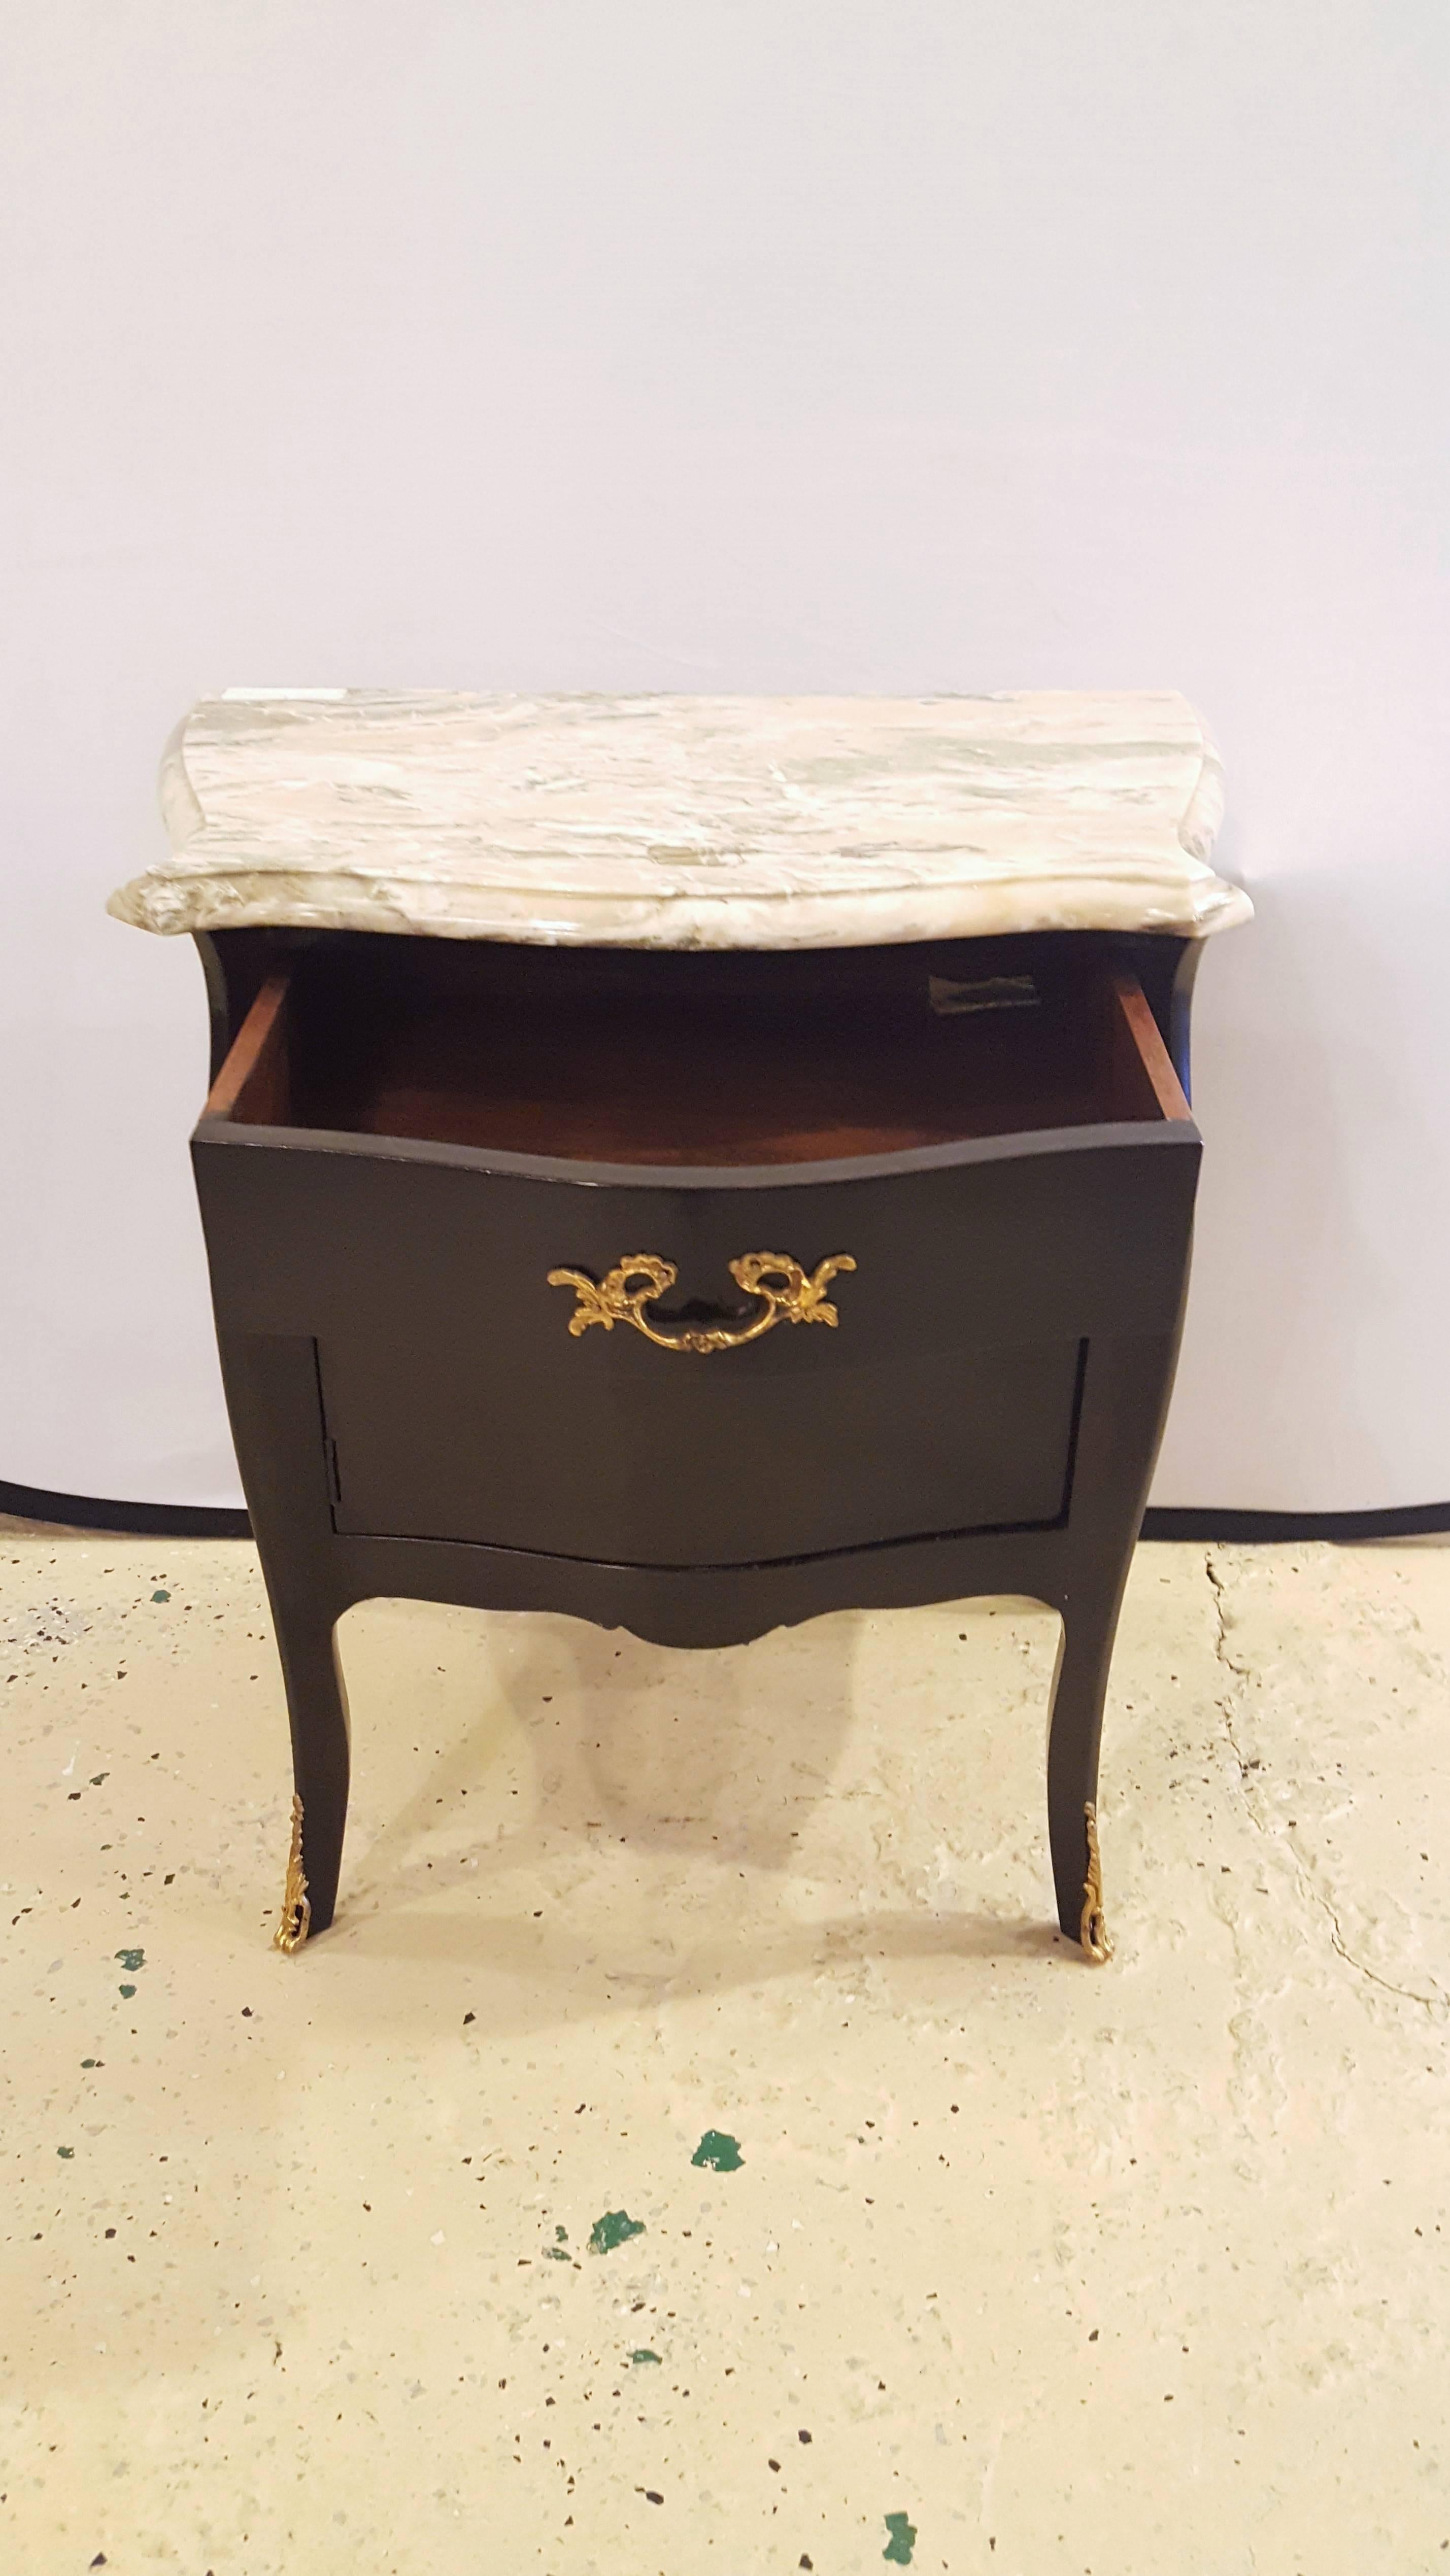 20th Century Pair of Hollywood Regency Style Ebonized Marble-Top Nightstands / End Tables